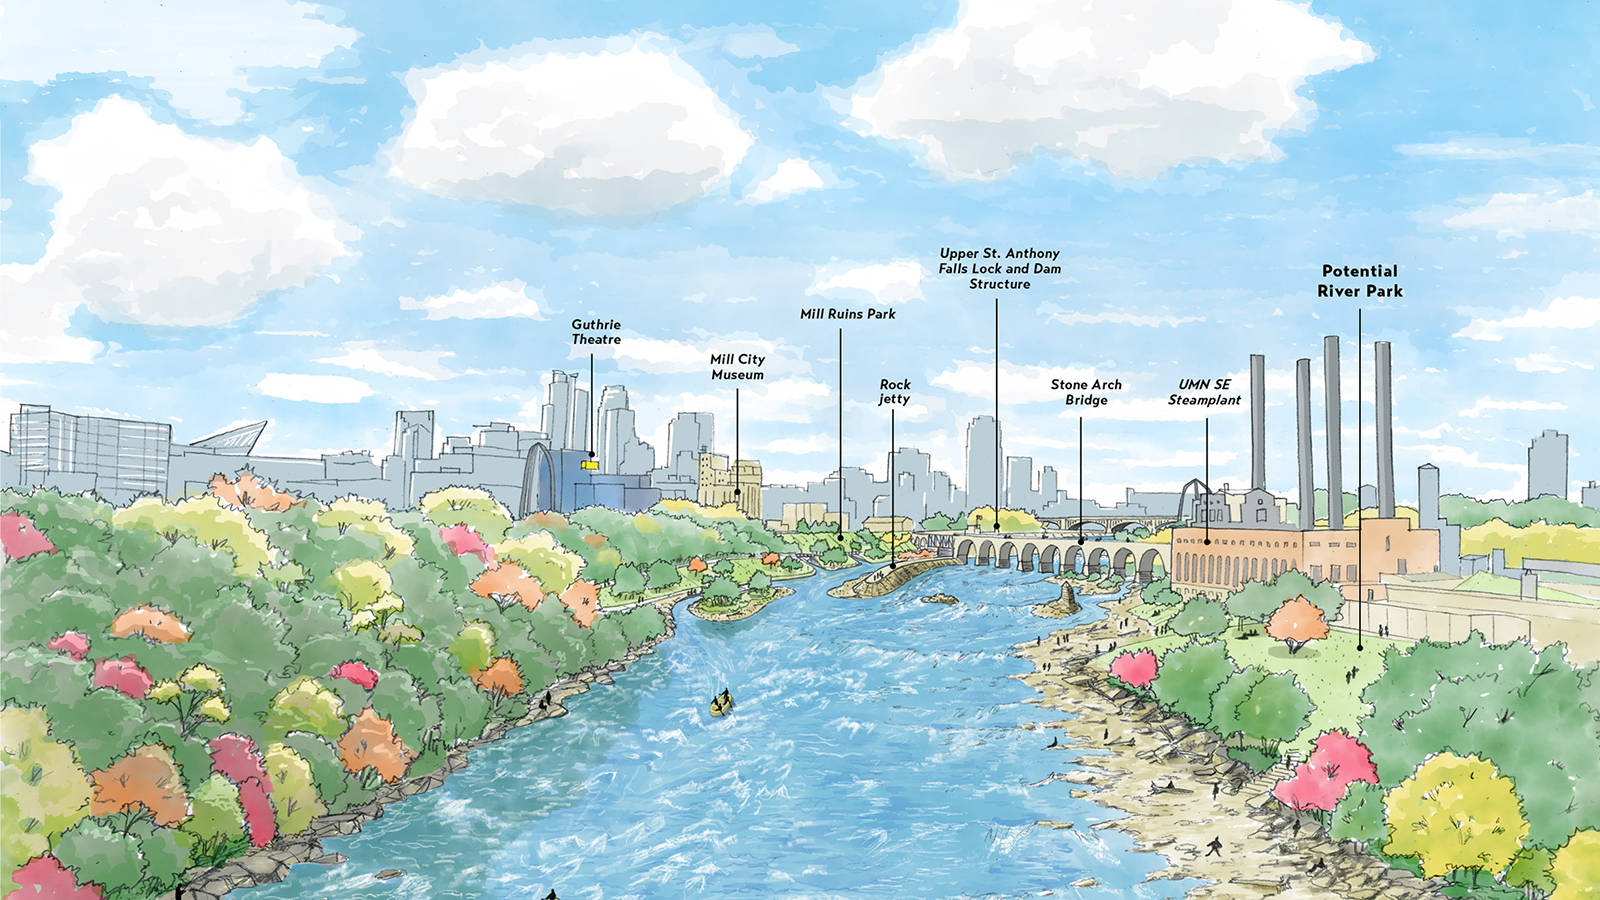 <p>Rendering of Lower St. Anthony Falls. Without the lock &amp; dam, the river level will drop 24 feet, revealing fast-flowing and rocky rapids. At low water, the shorelines could extend out from both banks and islands could emerge. Recreational opportunities could change here based on the nature and flow of the river and water level. </p>